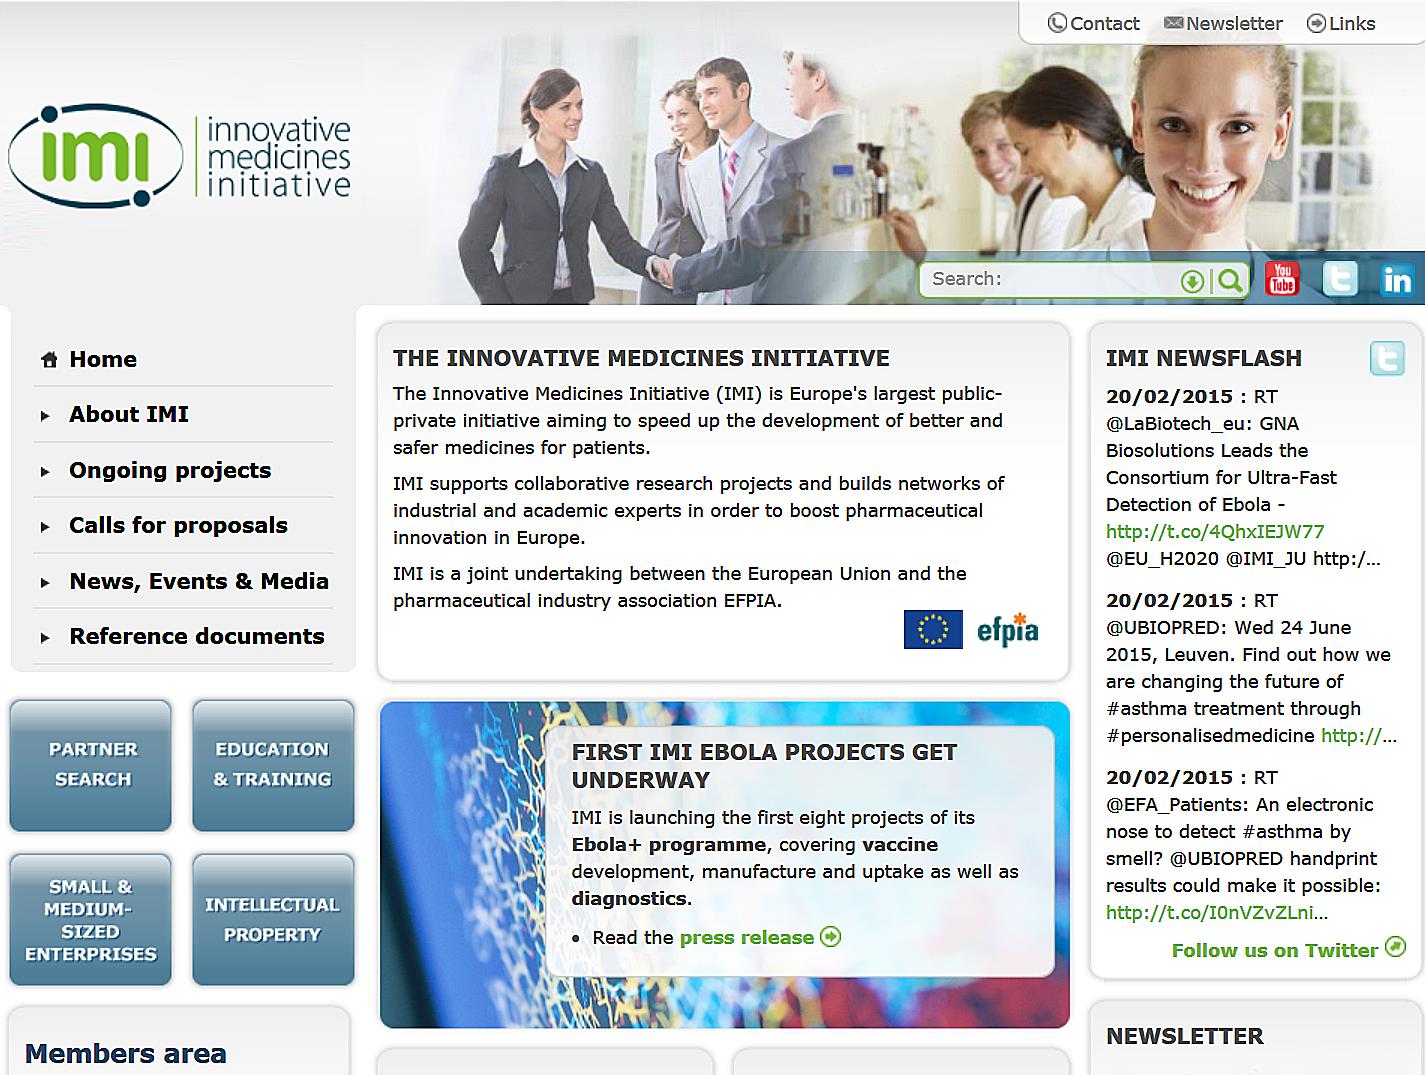 THE INNOVATIVE MEDICINES INITIATIVE (IMI) The Innovative Medicines Initiative (IMI) is Europe's largest public-private initiative, a joint undertaking between the European Union and the